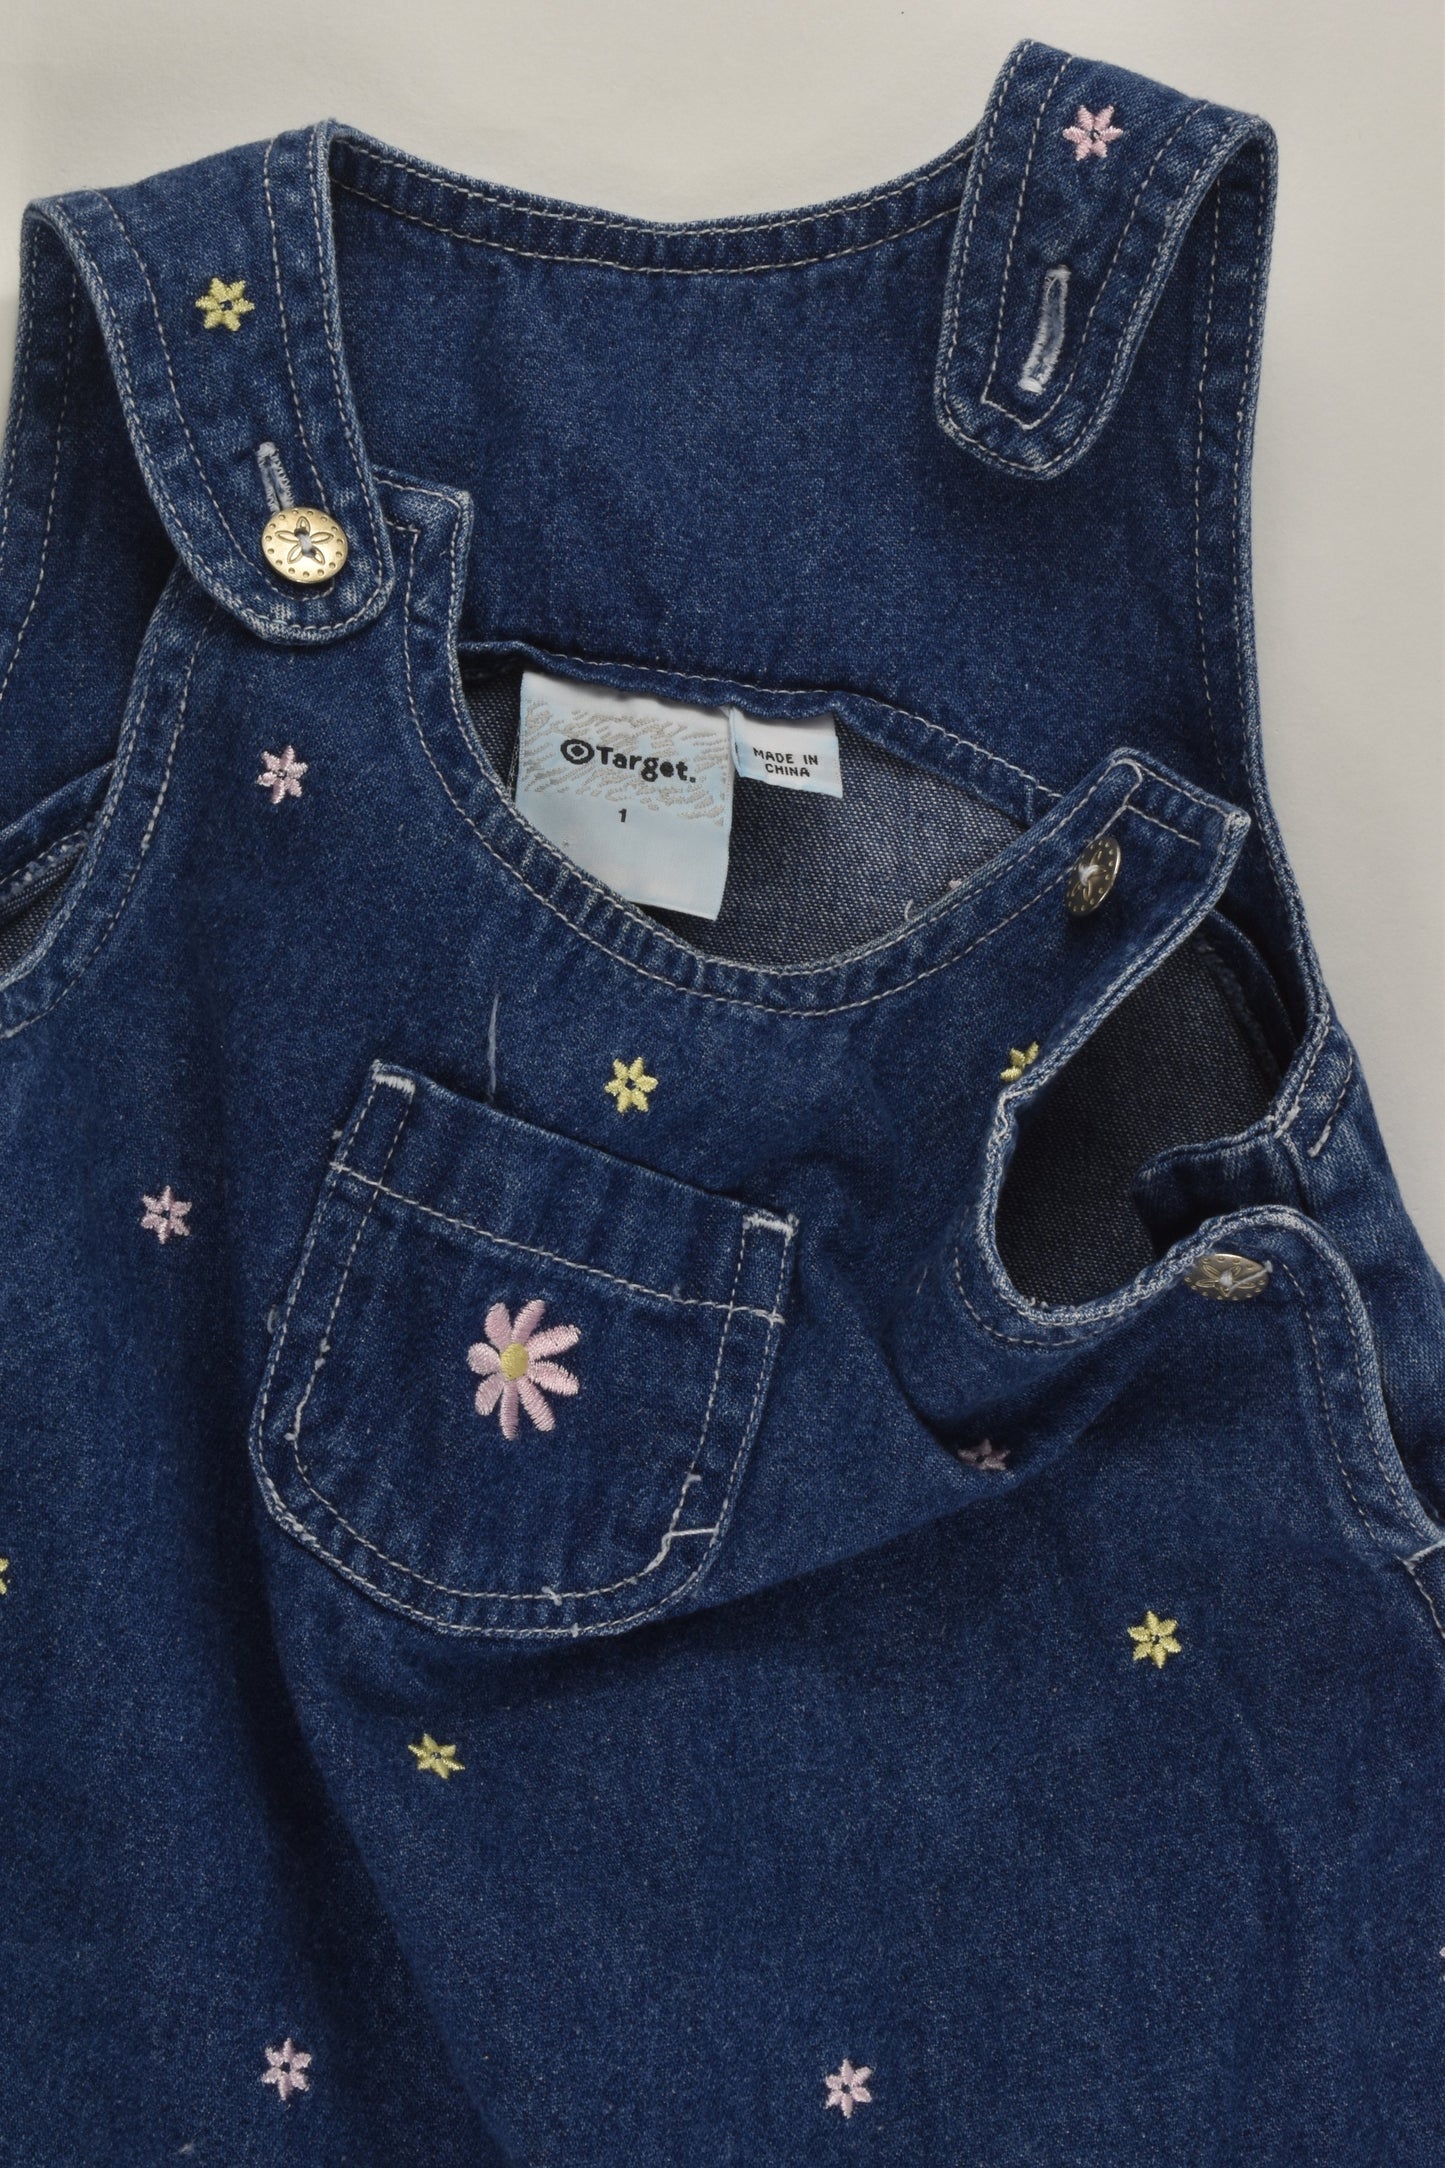 Target Size 1 Denim Dress with Floral Embroidery